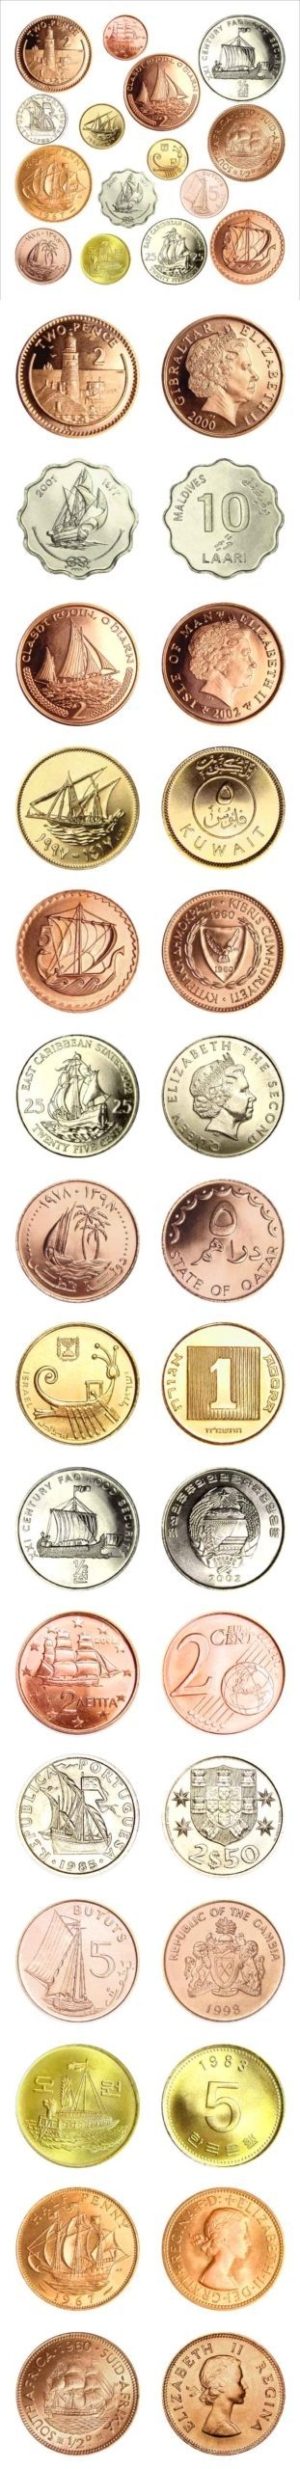 Fifteen (15) Ship Coins from Fifteen (15) Different Countries - All Brilliant Uncirculated